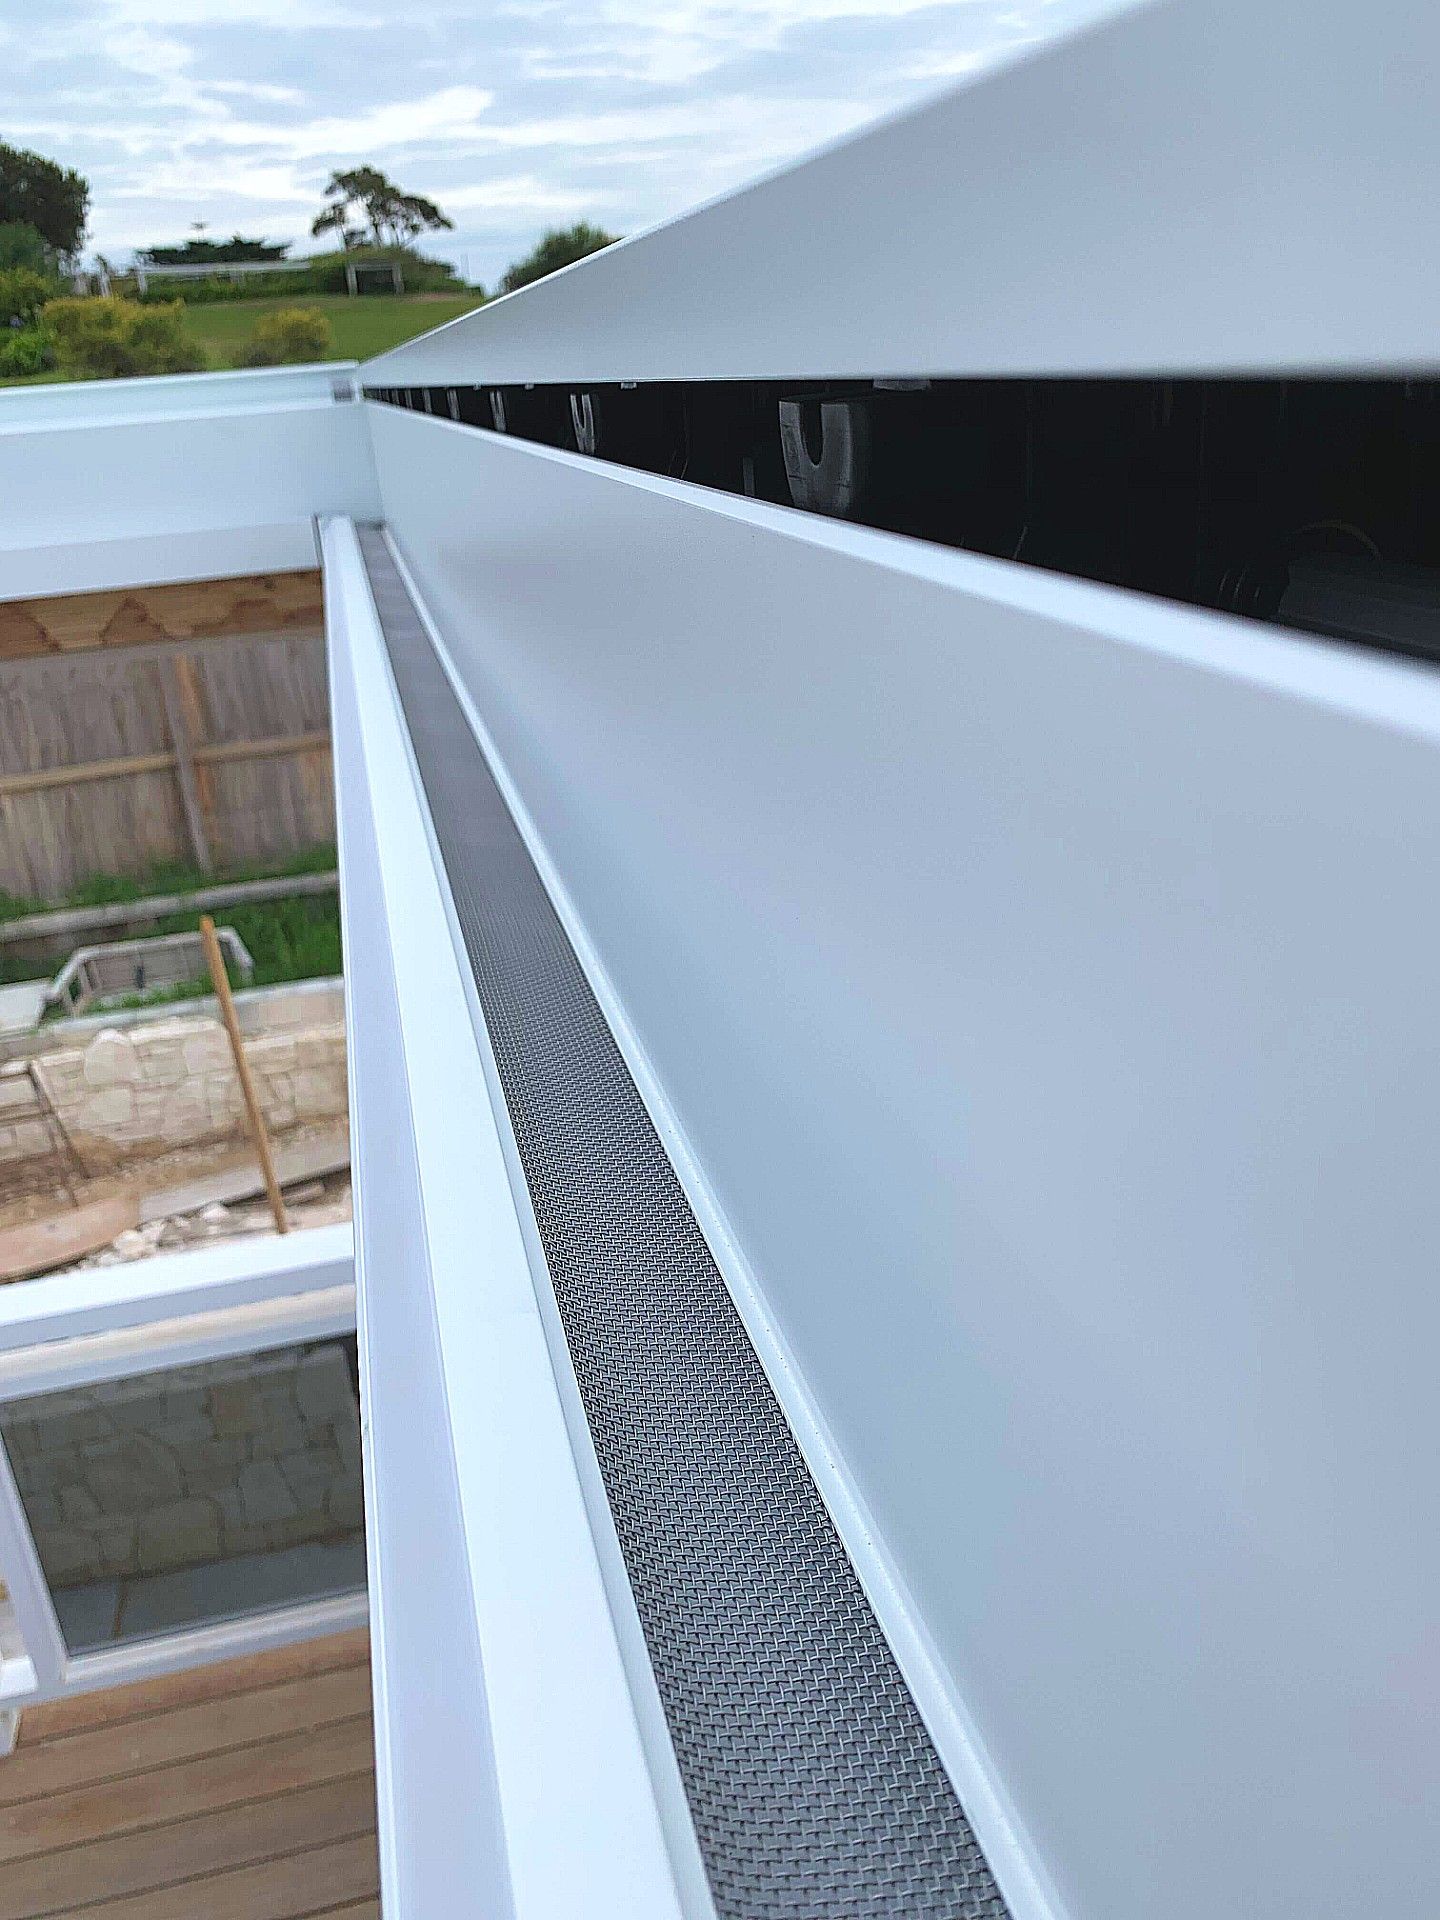 Stainless steel mesh lines the gutters to prevent build up